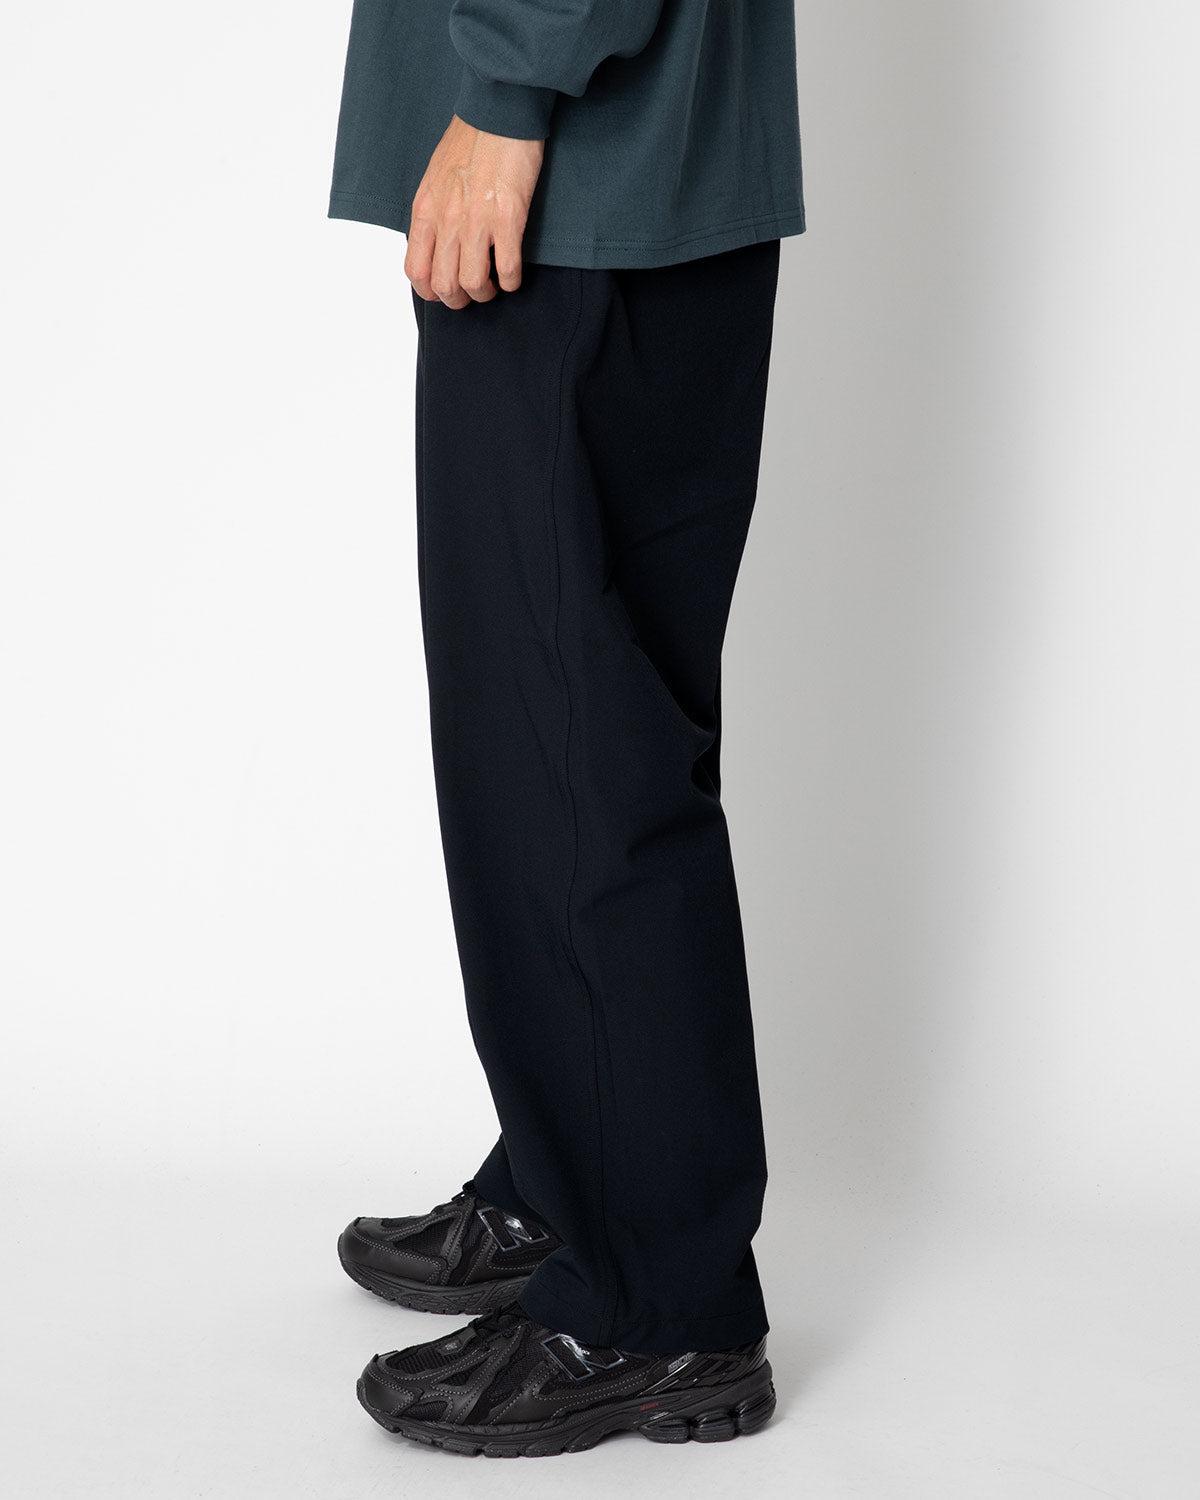 STRETCH TWILL WIDE TAPERED FIELD PANTS